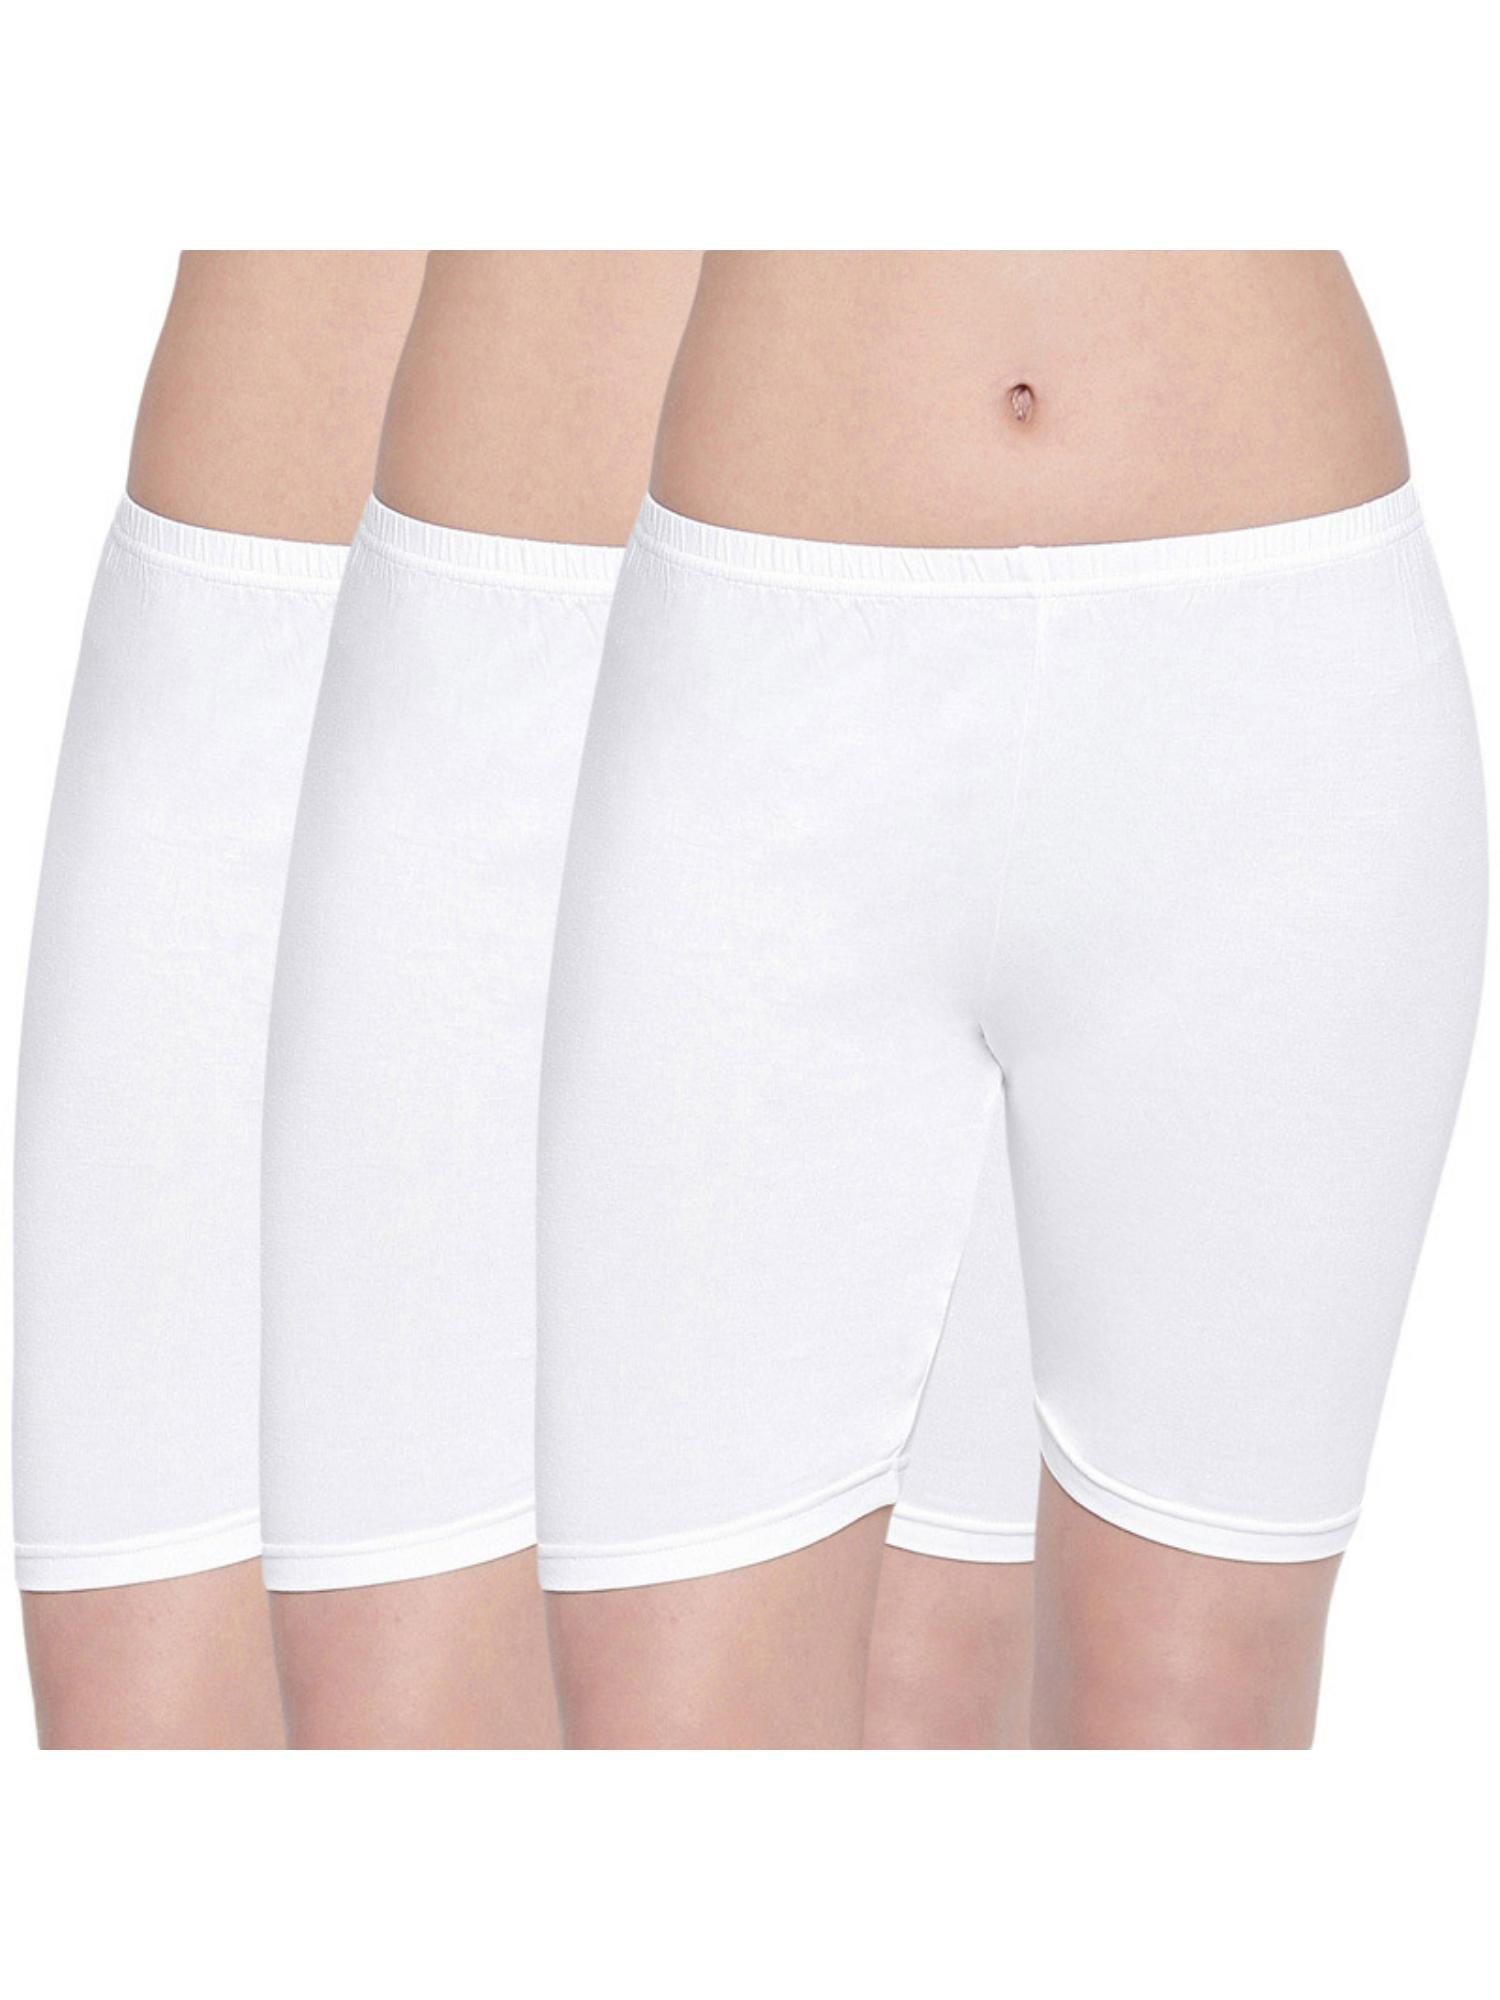 pack of 3 cycling shorts - white